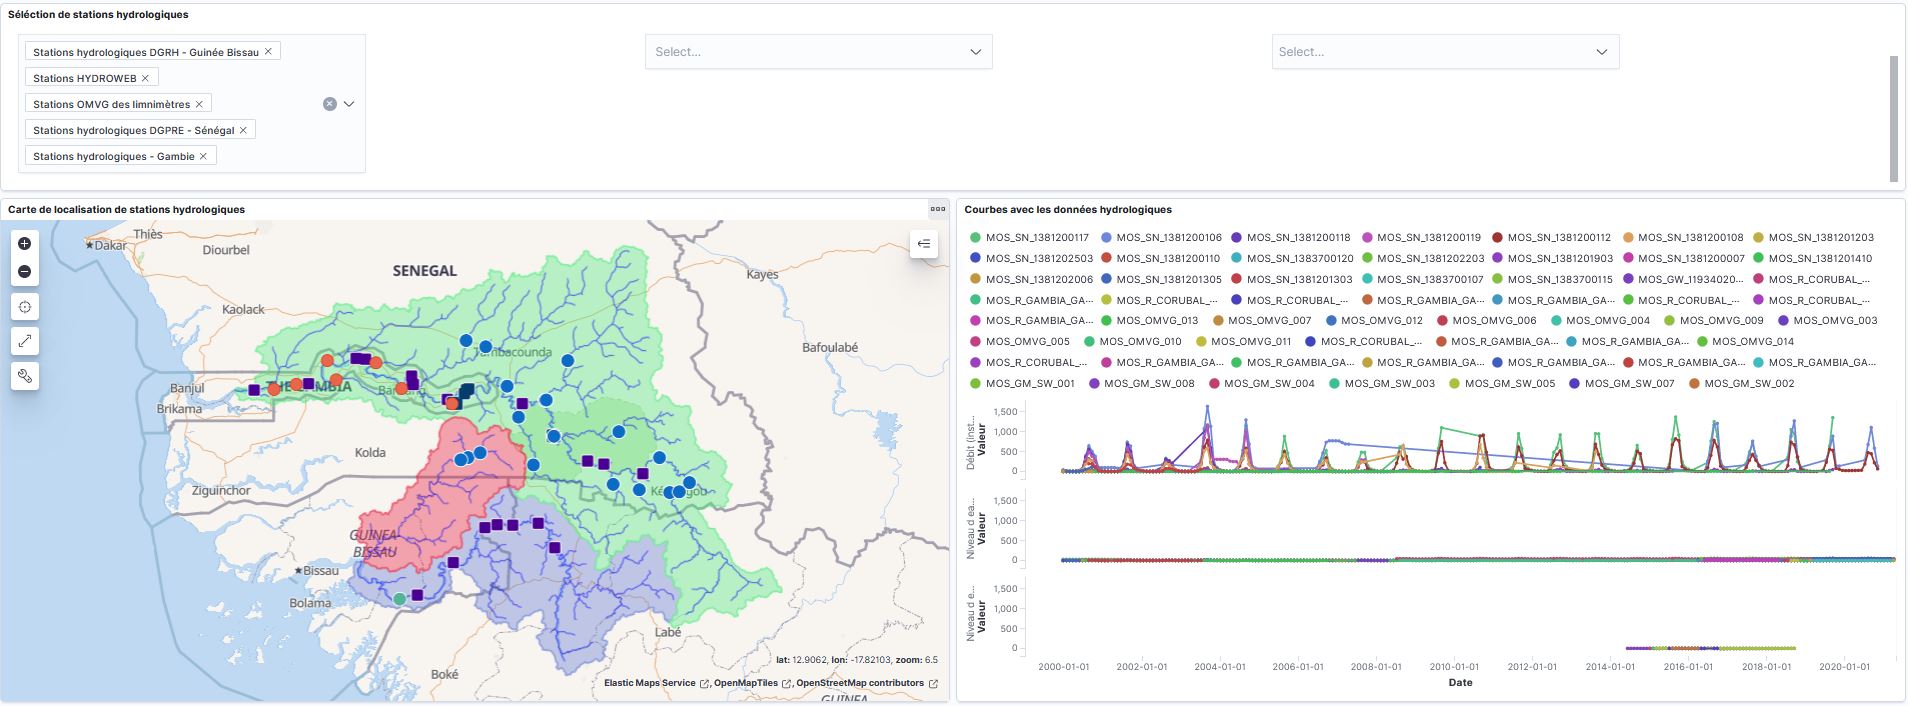 Dashboard - Hydrological data of all stations